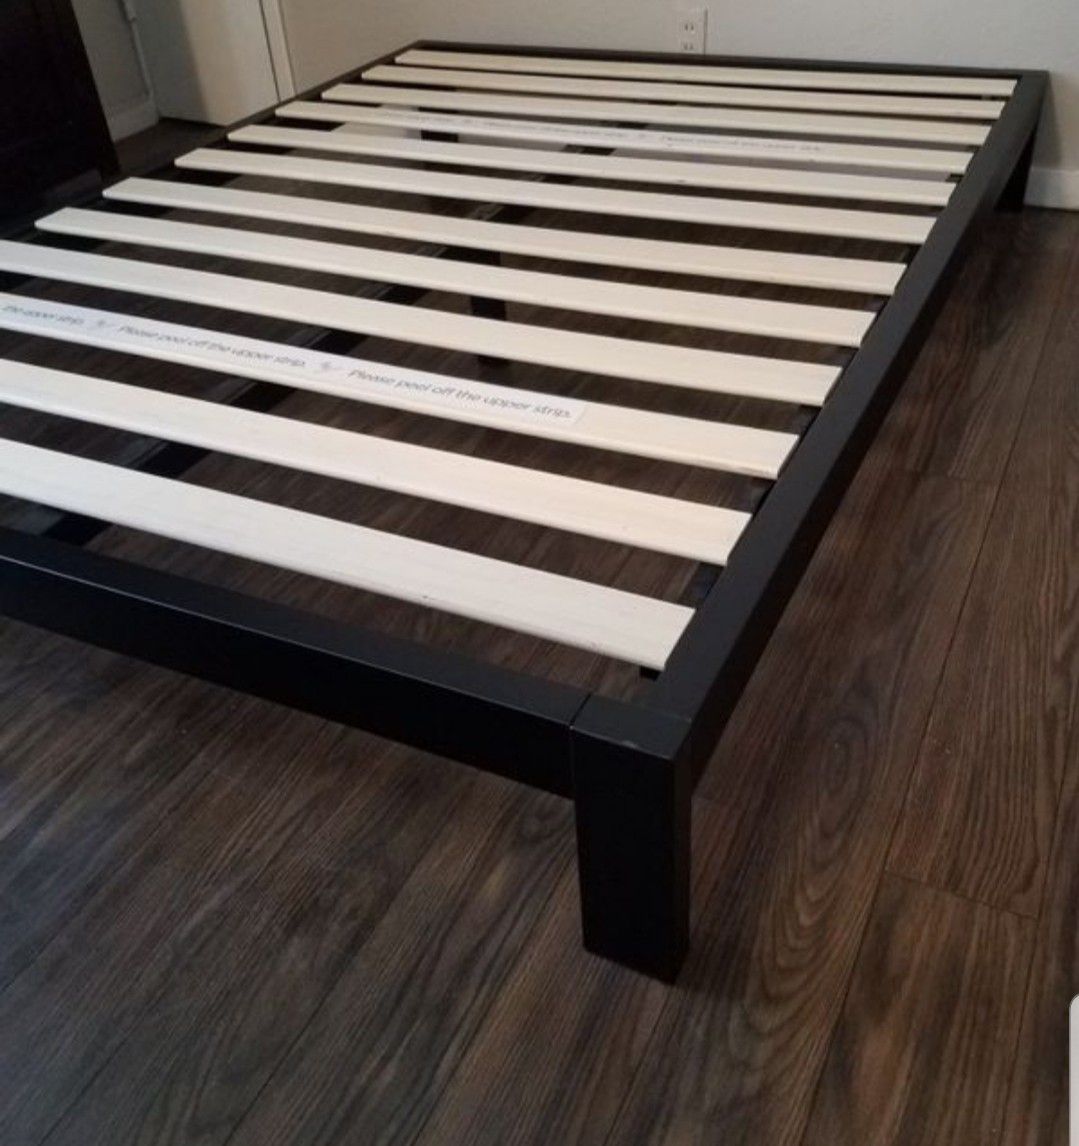 Platform bed frame Queen size. New. Free delivery in Modesto. $70